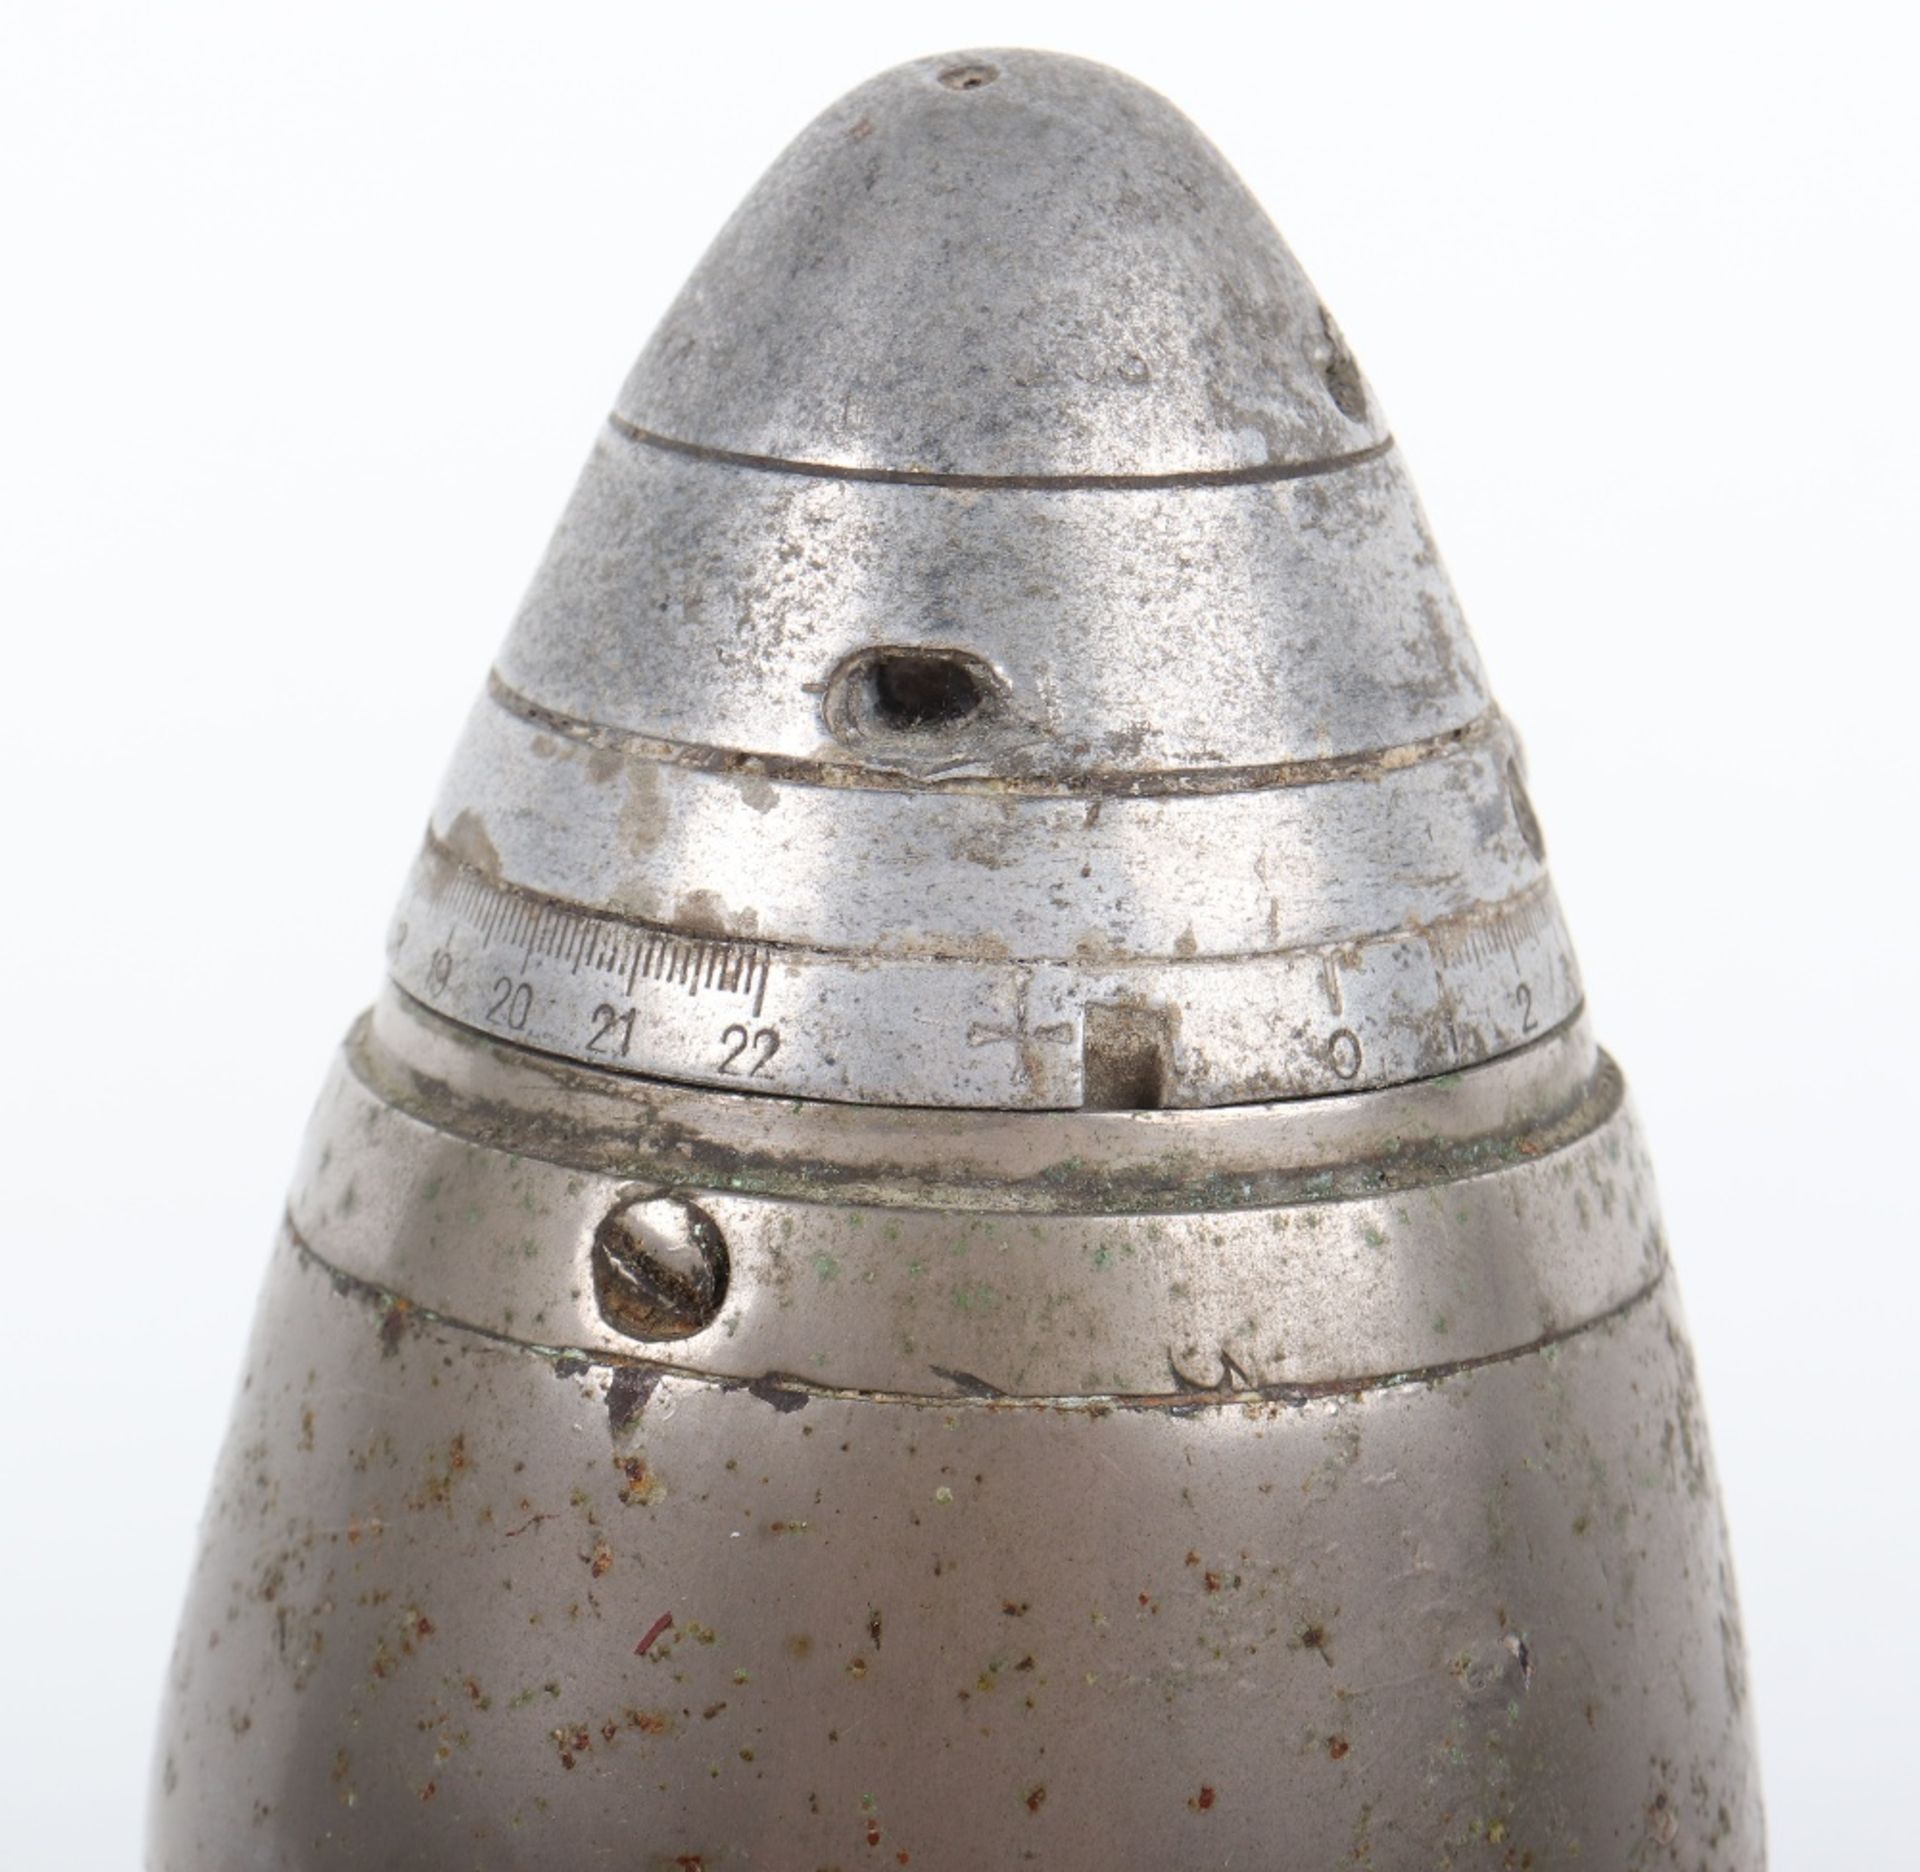 Inert British WW1 18pdr Projectile - Image 3 of 7